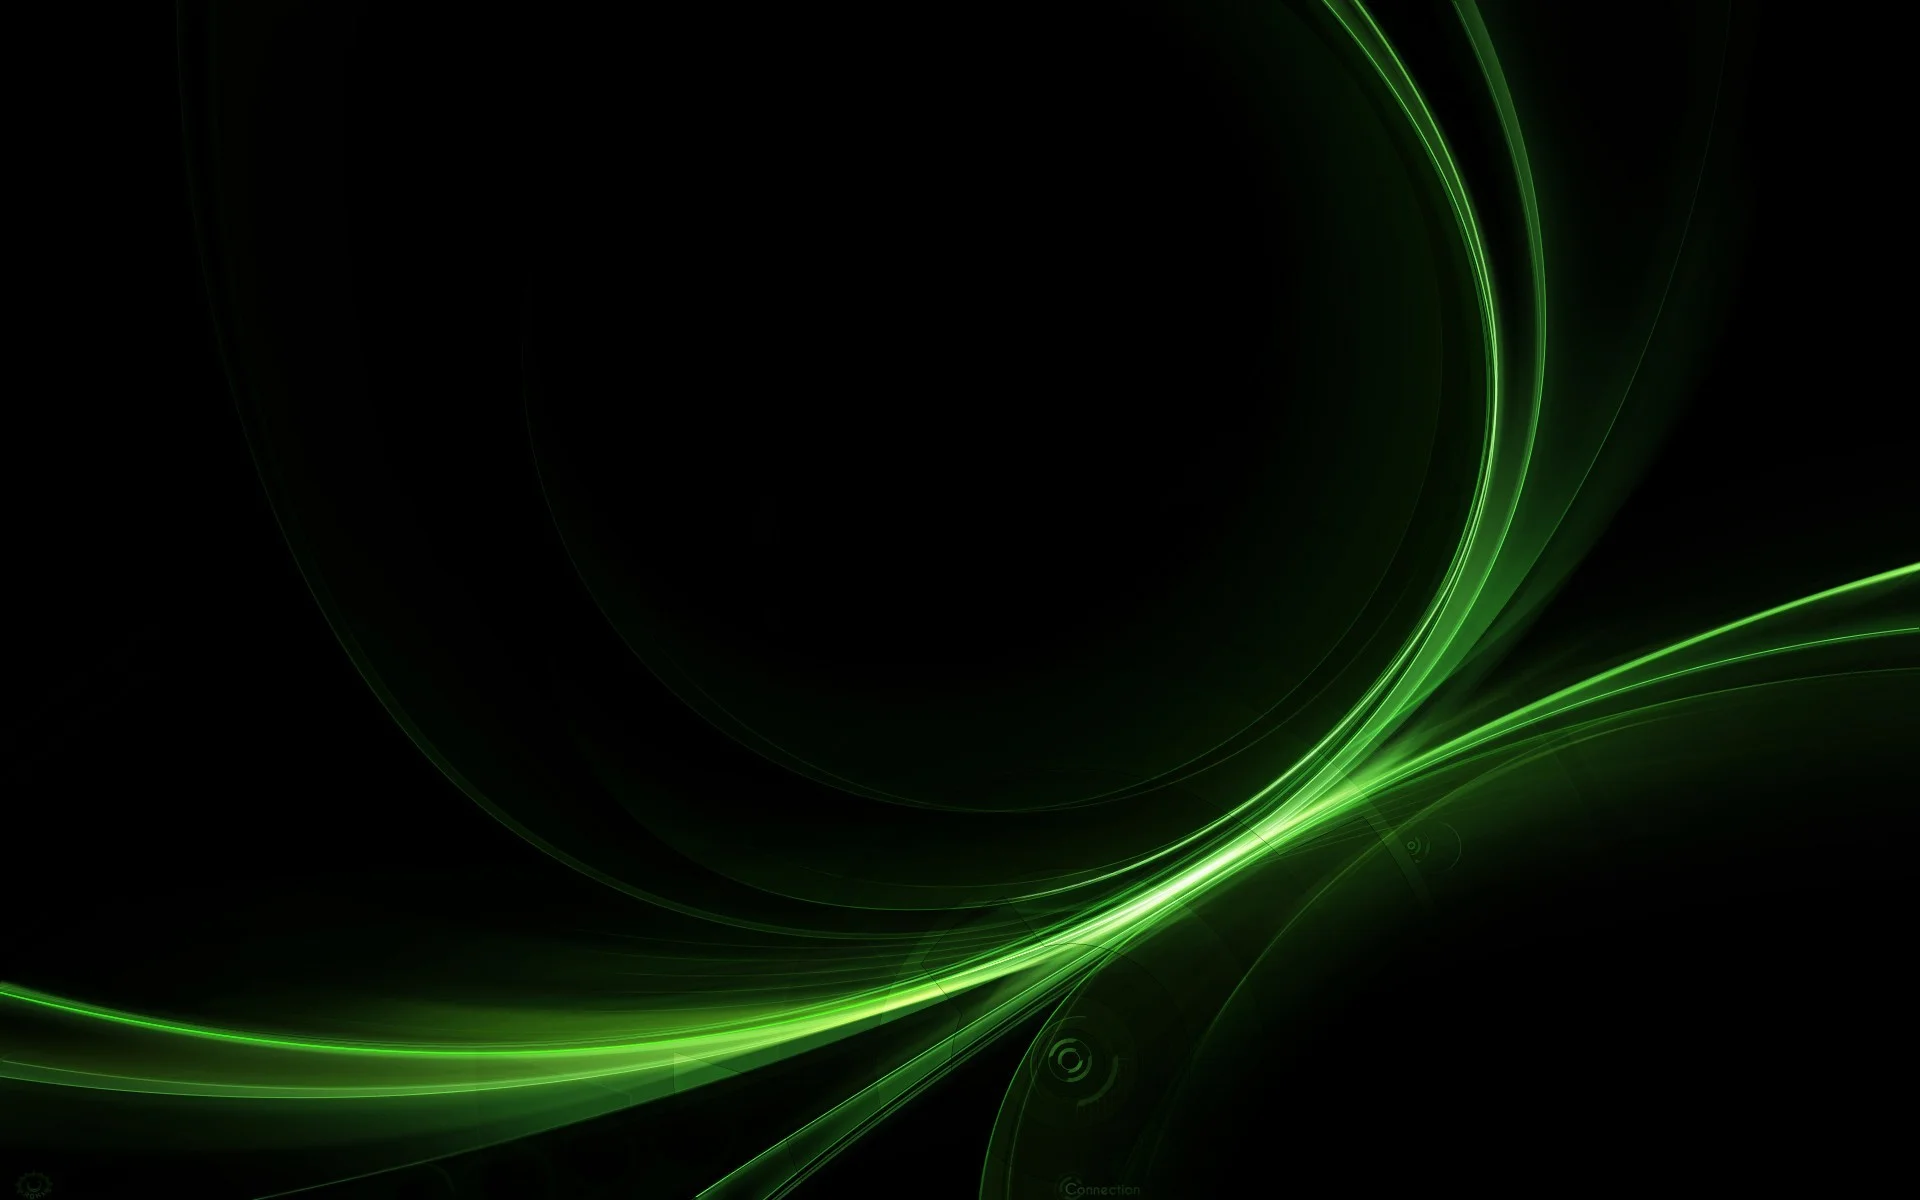 MS Black And Green Wallpaper, 46 Beautiful Black And Green